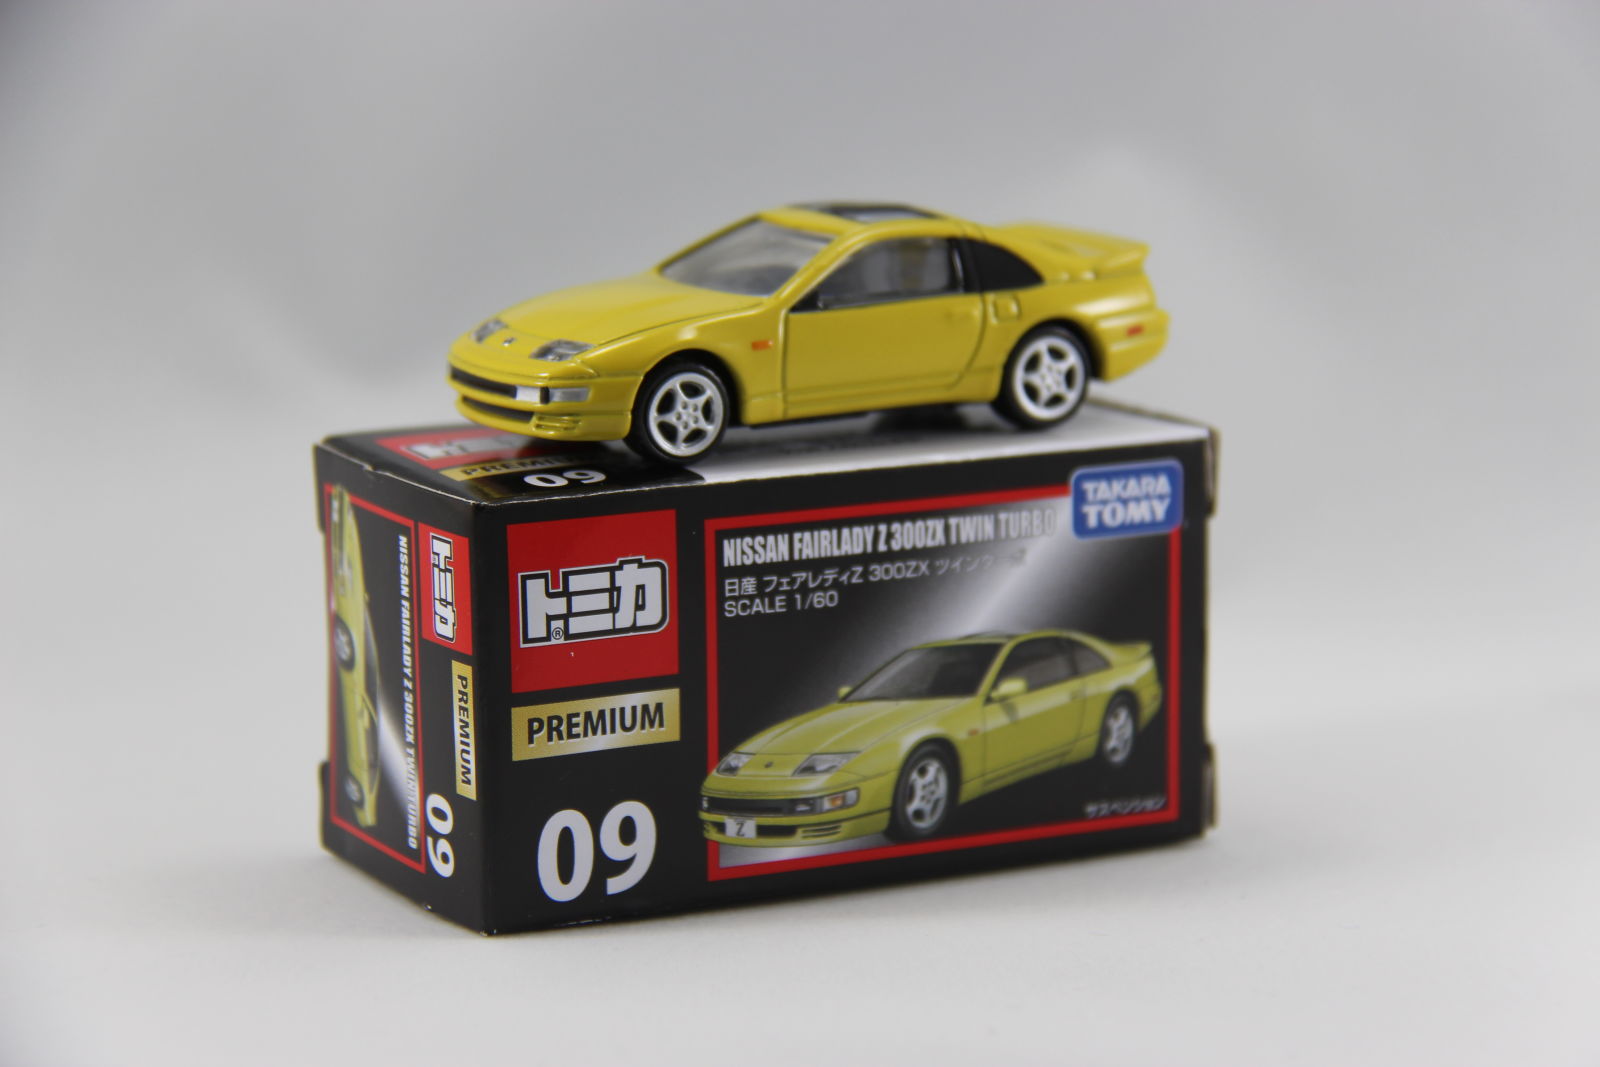 Again, this was enticing to me as I have only a Motormax 300ZX (a great casting in its own right, but no Tomica), and it is also my first Tomica Premium (non-Limited Vintage)